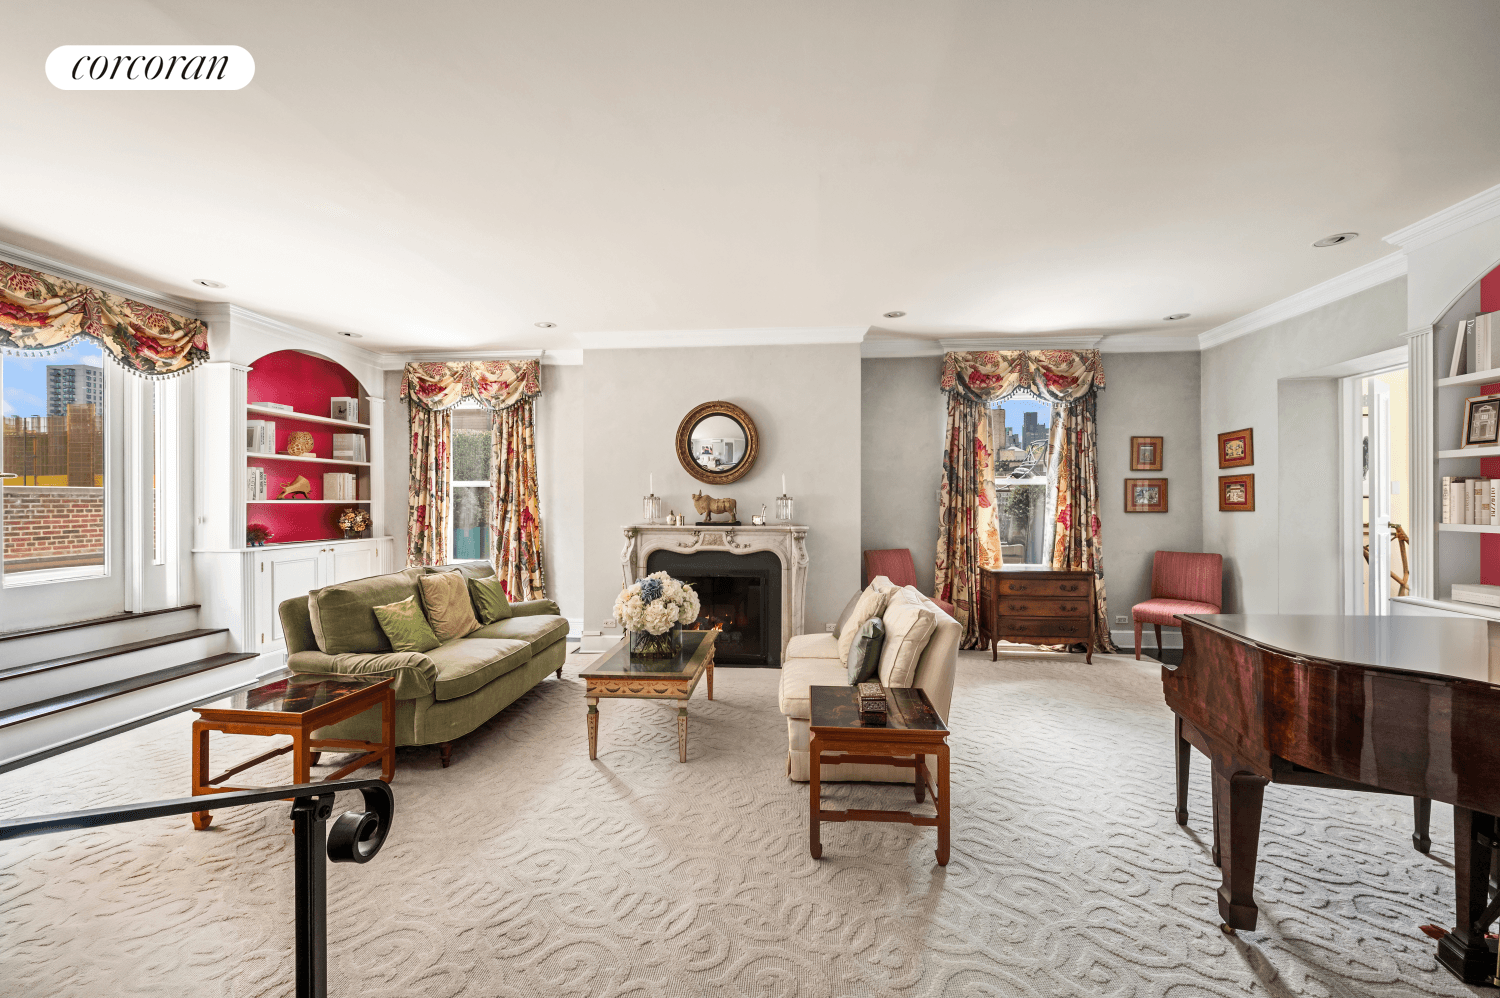 This elegant, approximate 2, 350 square foot 8 room prewar Penthouse, with its sprawling, approximate 2, 600 square foot wrap terrace, is now on the market for sale for the ...